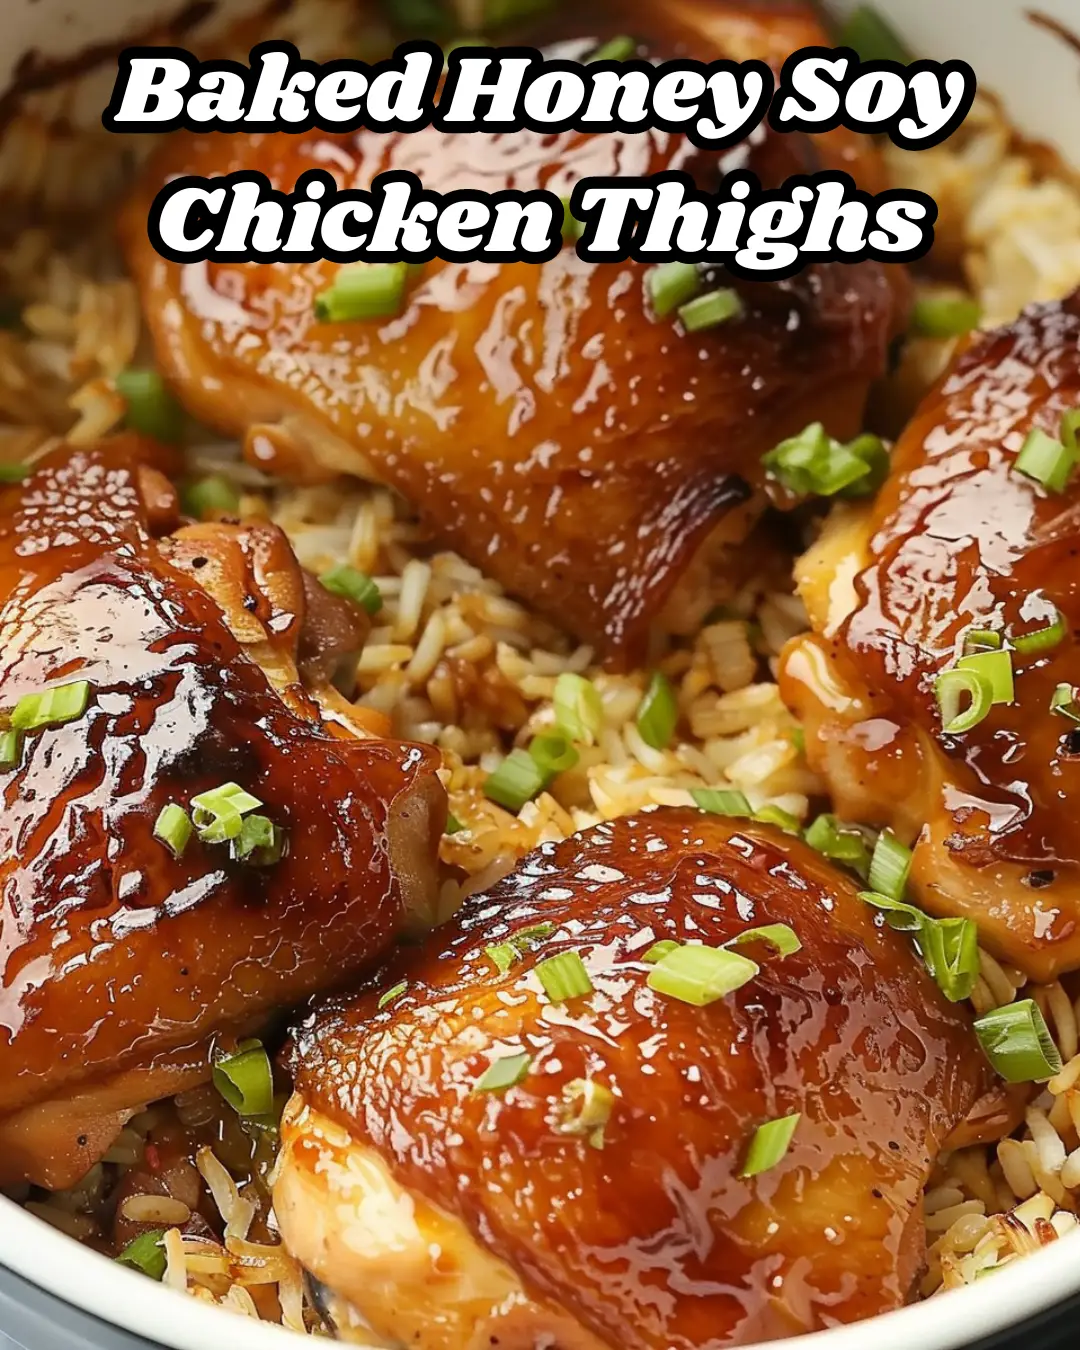 Baked Honey Soy Chicken Thighs Recipe – Foodyhealthylife